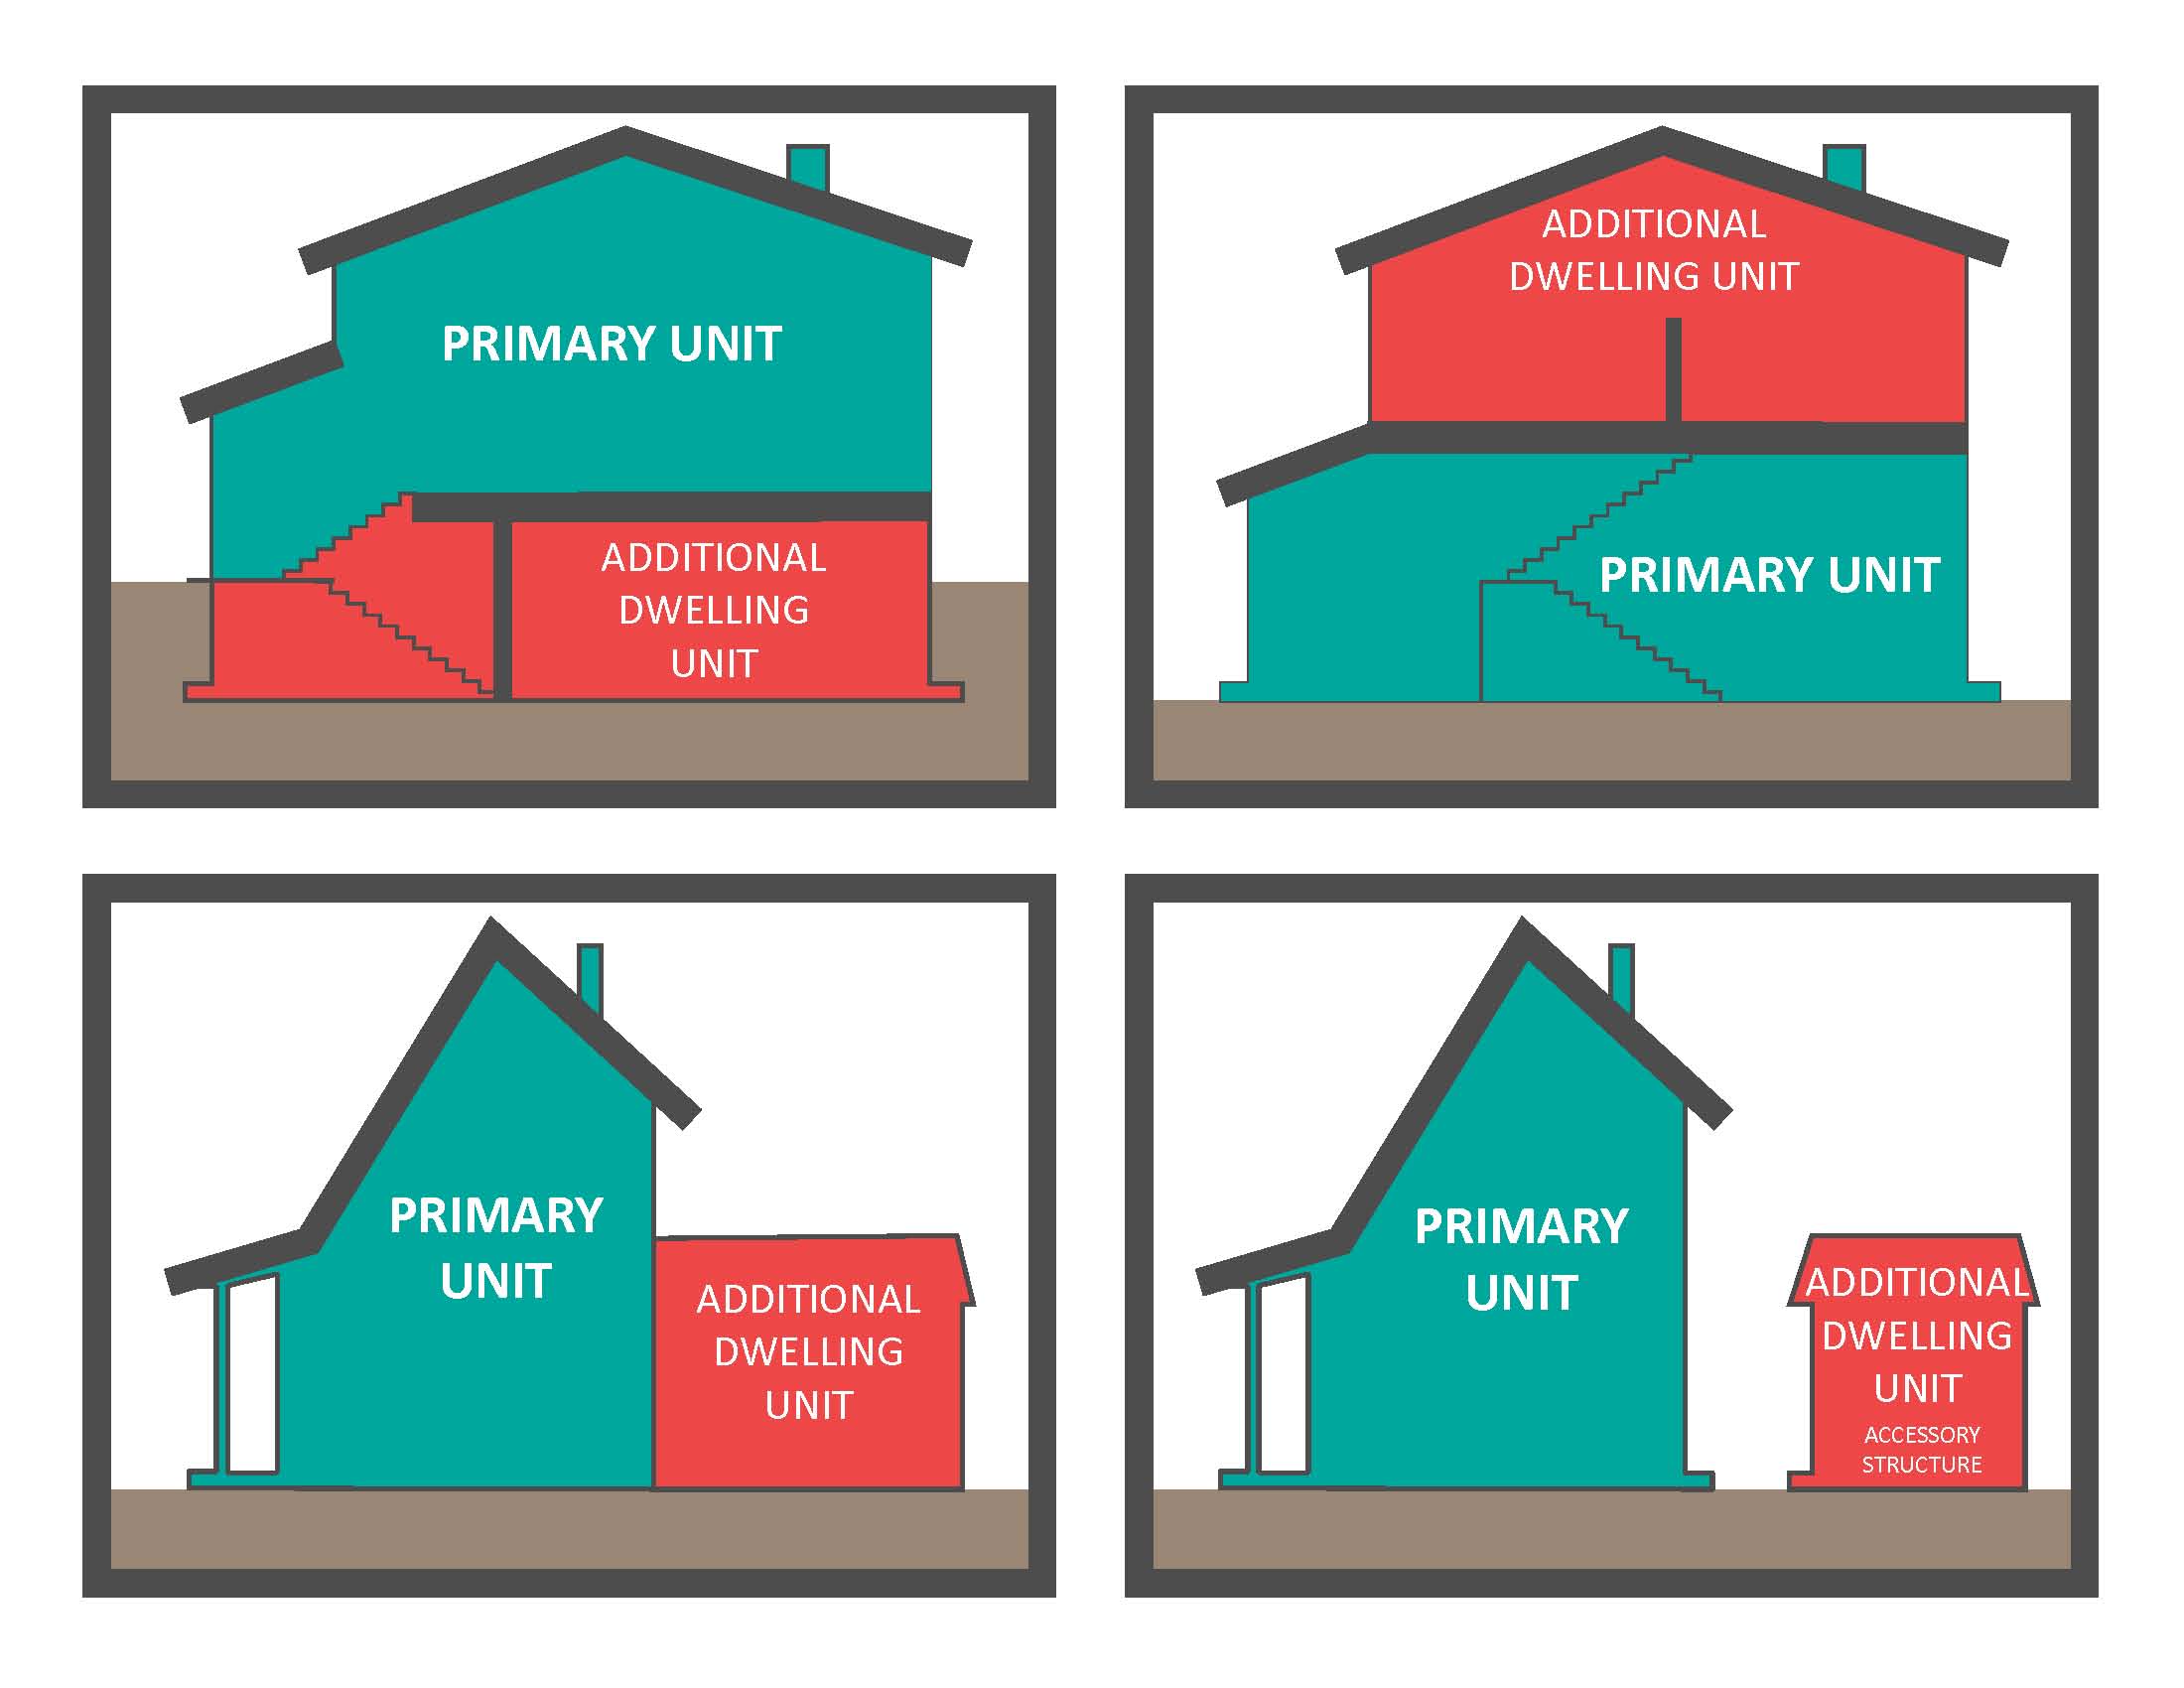 Examples of additional dwelling or second residential units